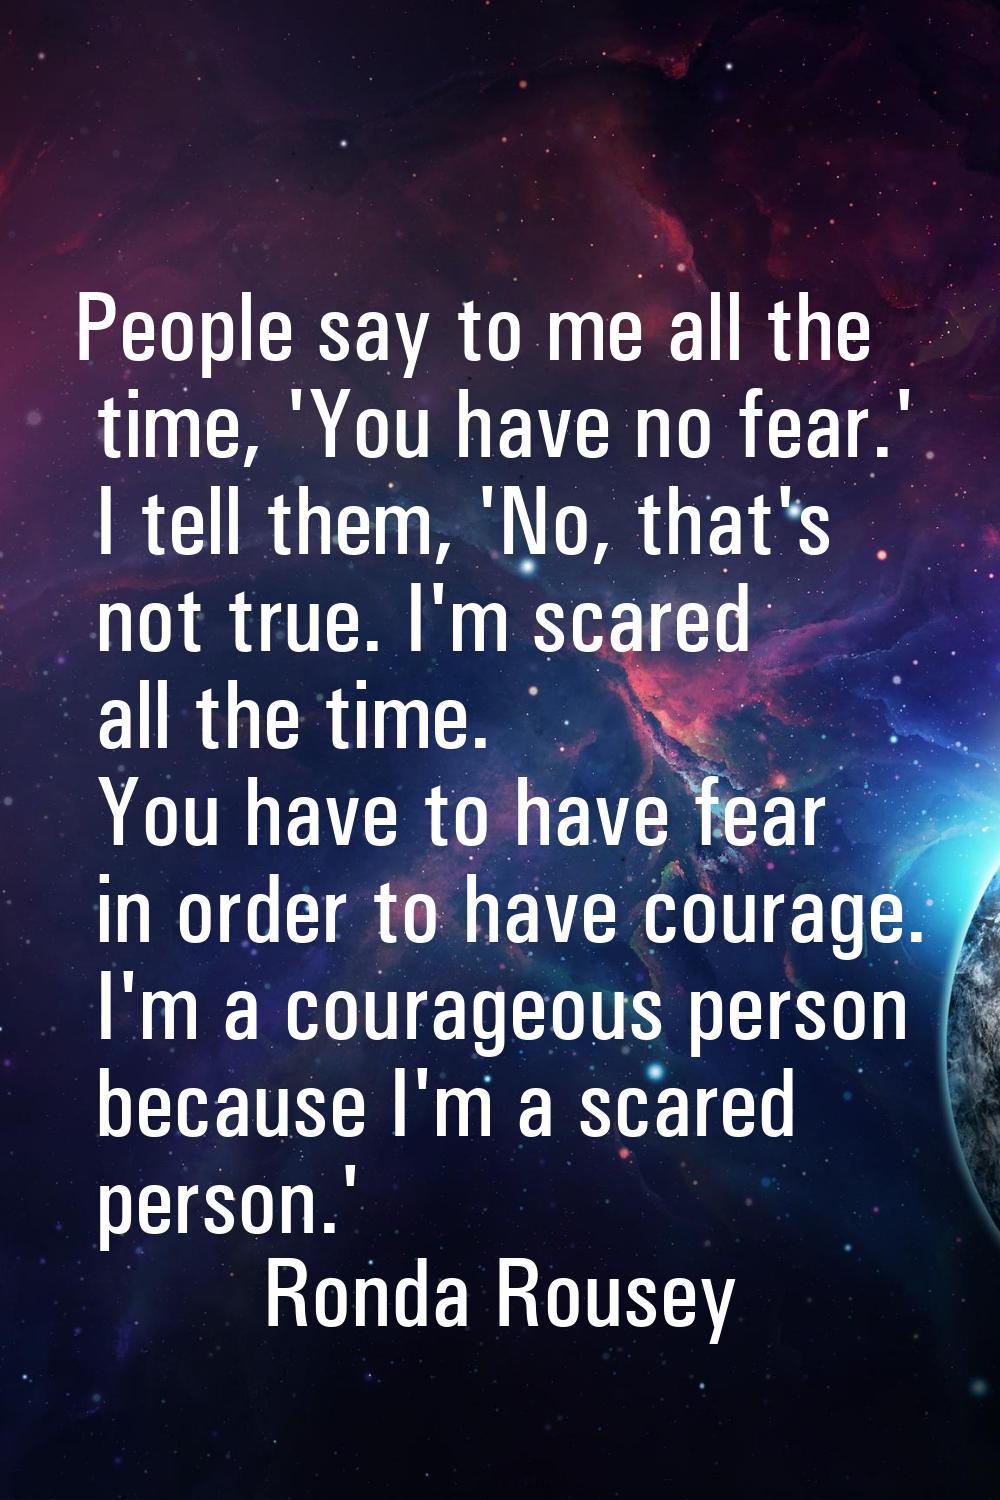 People say to me all the time, 'You have no fear.' I tell them, 'No, that's not true. I'm scared al